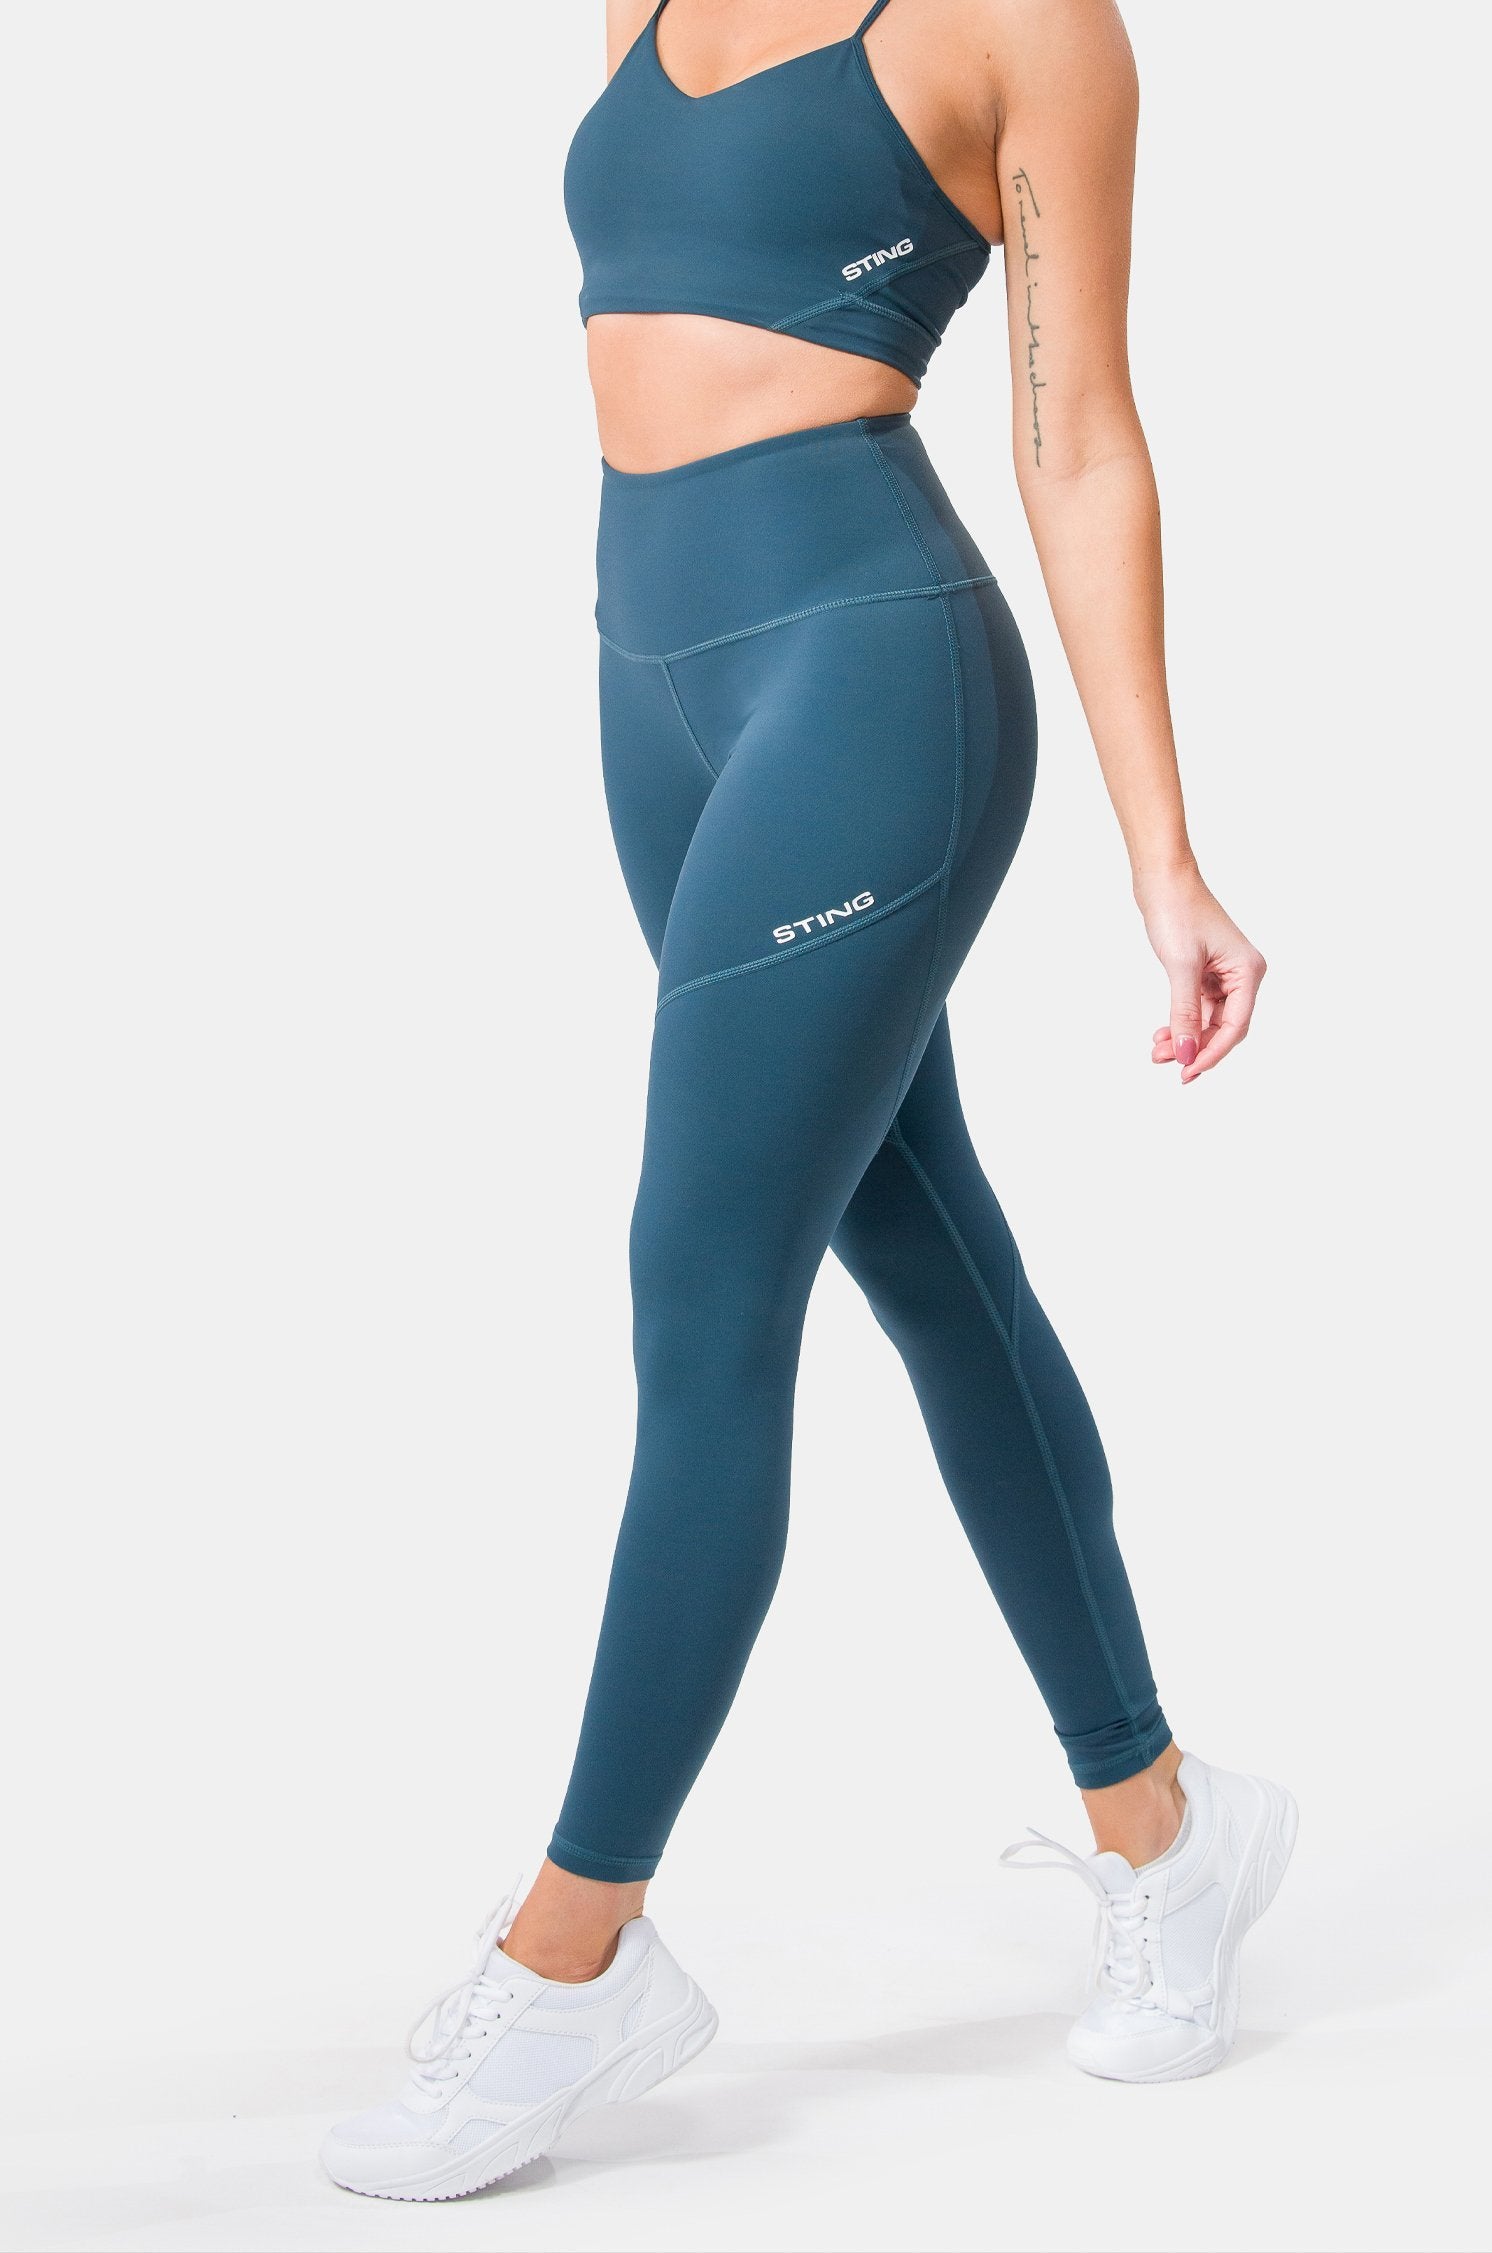 Women's - Core Sports High Waisted Leggings in Black/coral